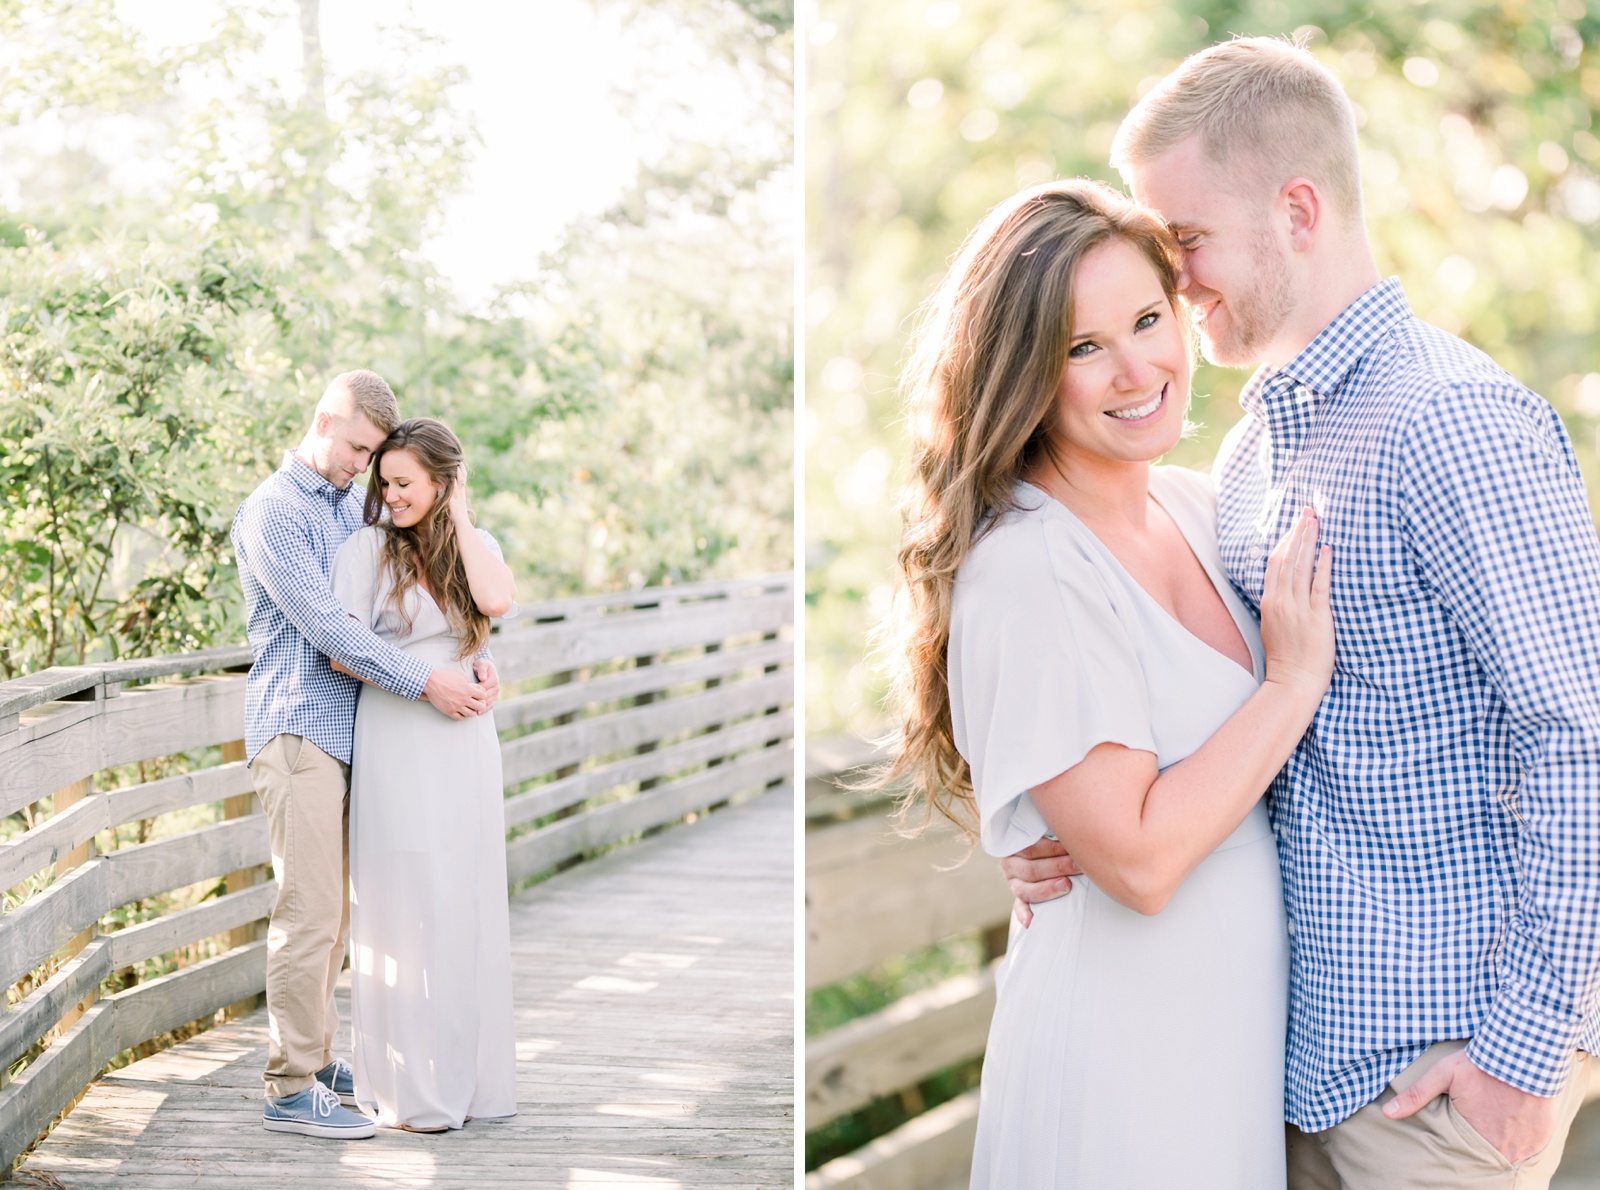 outer-banks-obx-kitty-hawk-engagement-photos_4604.jpg